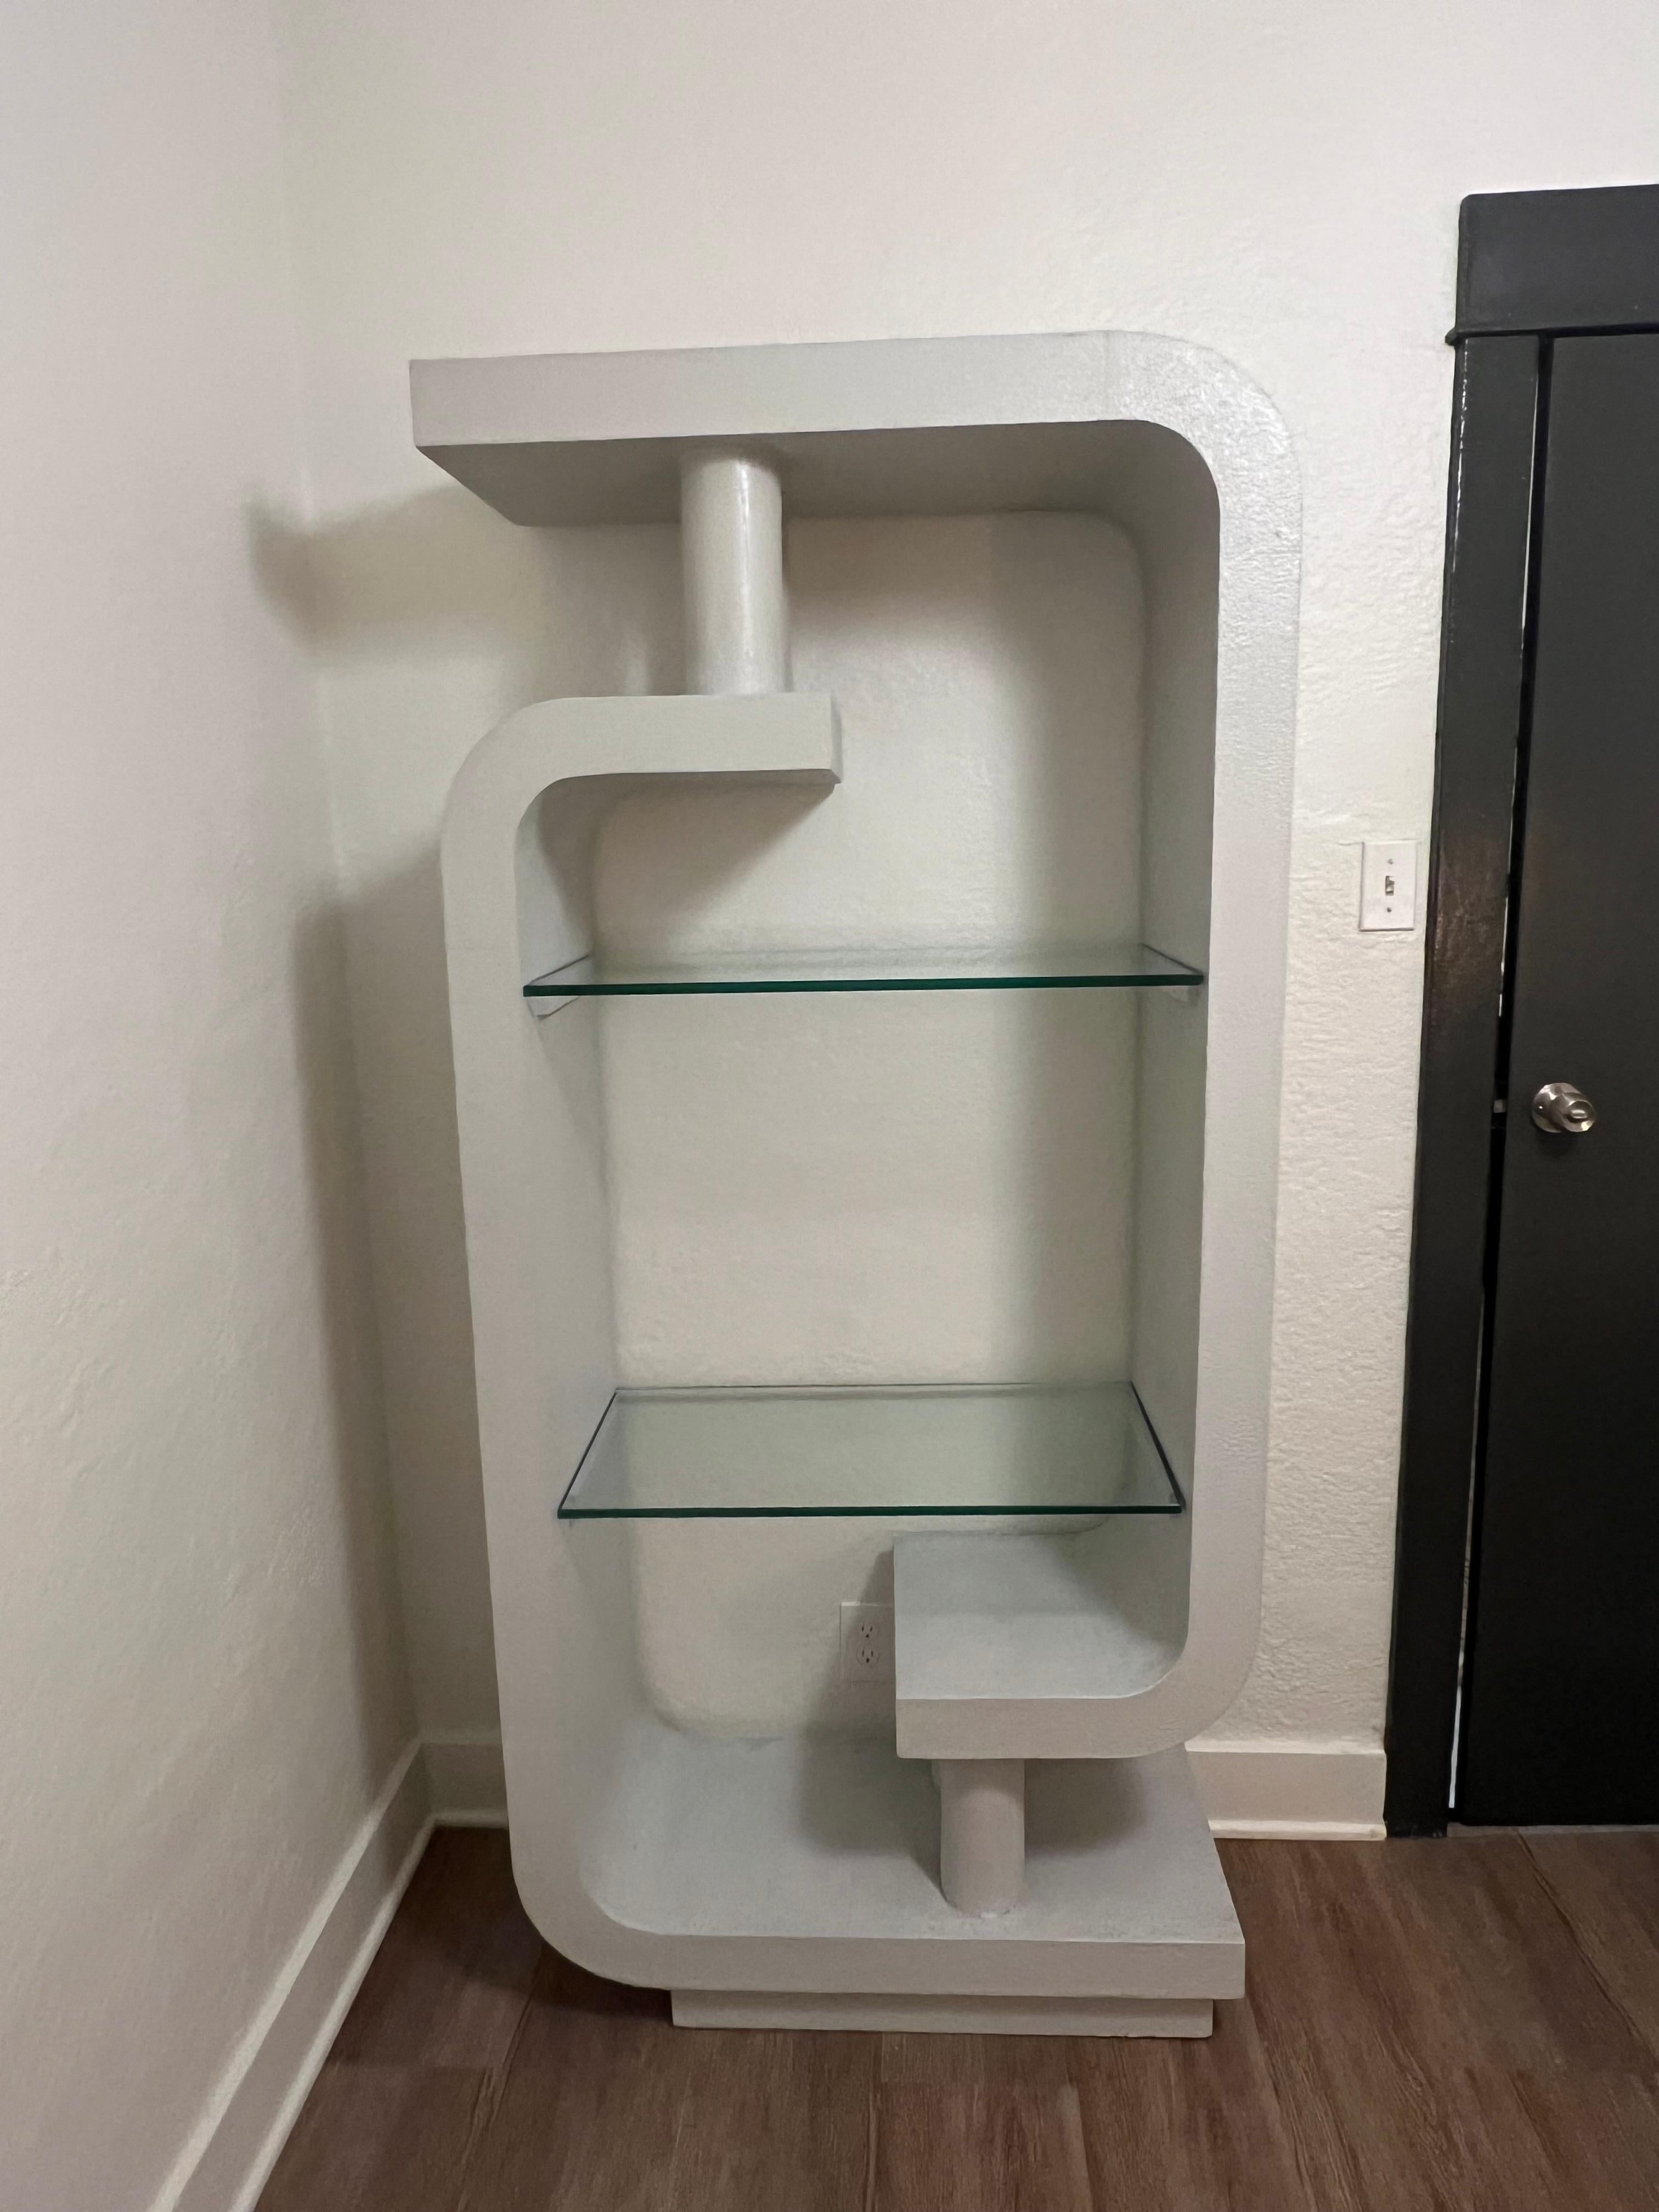 Classic postmodern sculptural etagere with two tempered glass shelves. Clean curves and lines sitting on a sleek plinth base. Made of fiberglass with a plaster texture on top of wood frame.  Light gray finish. Small chips on glass shelves- please